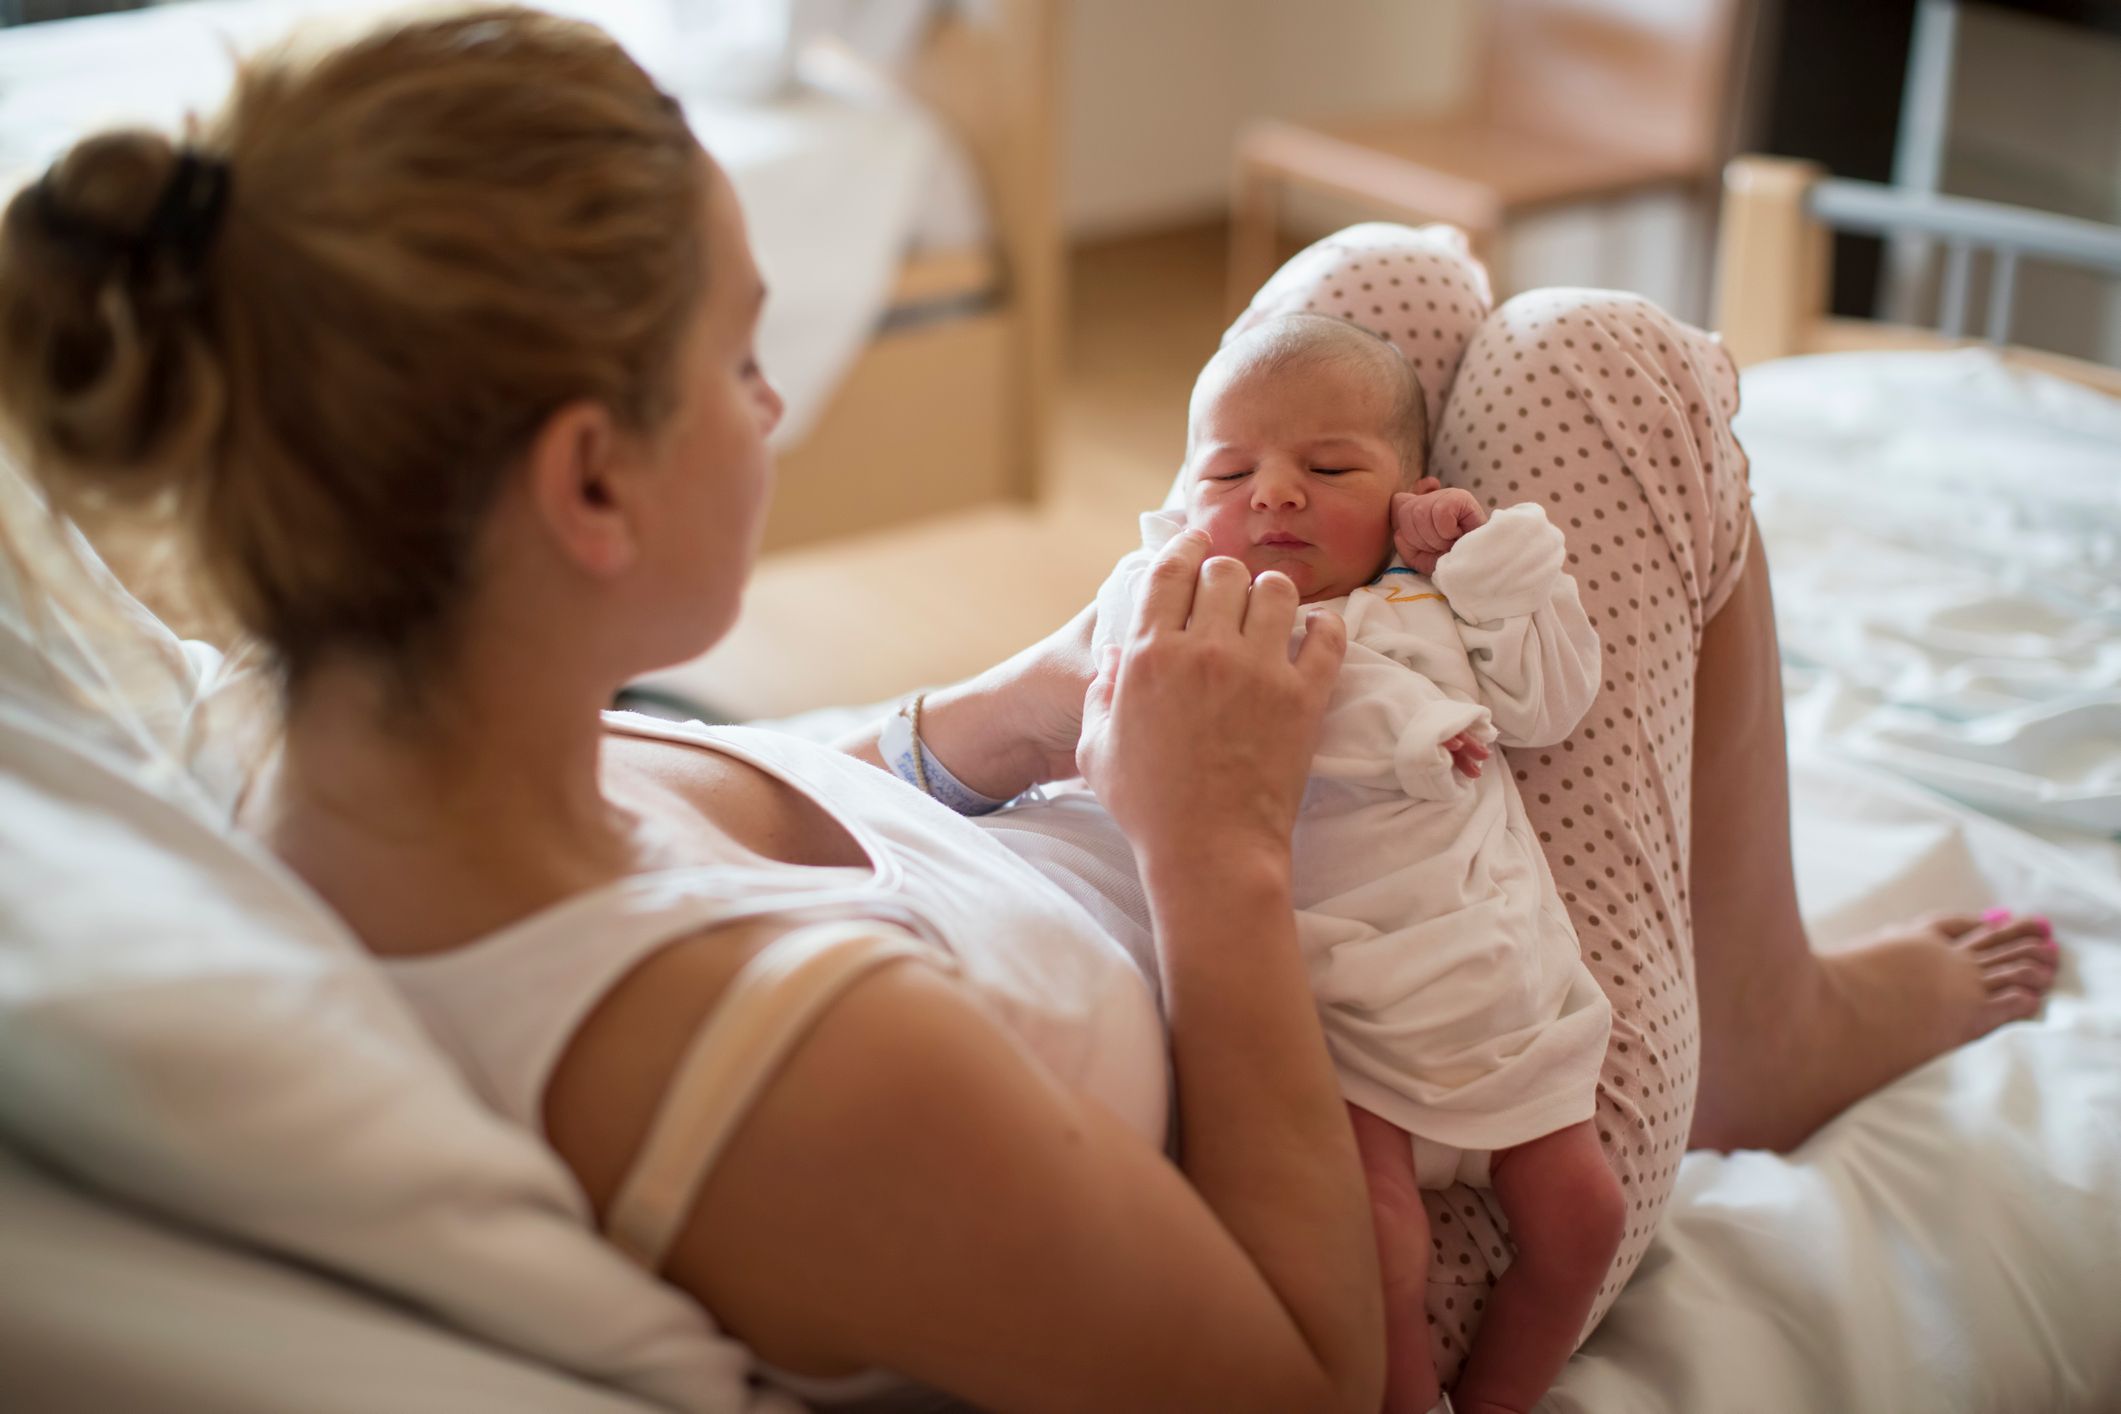 A mom holding her newborn baby in a room. | Source: Shutterstock